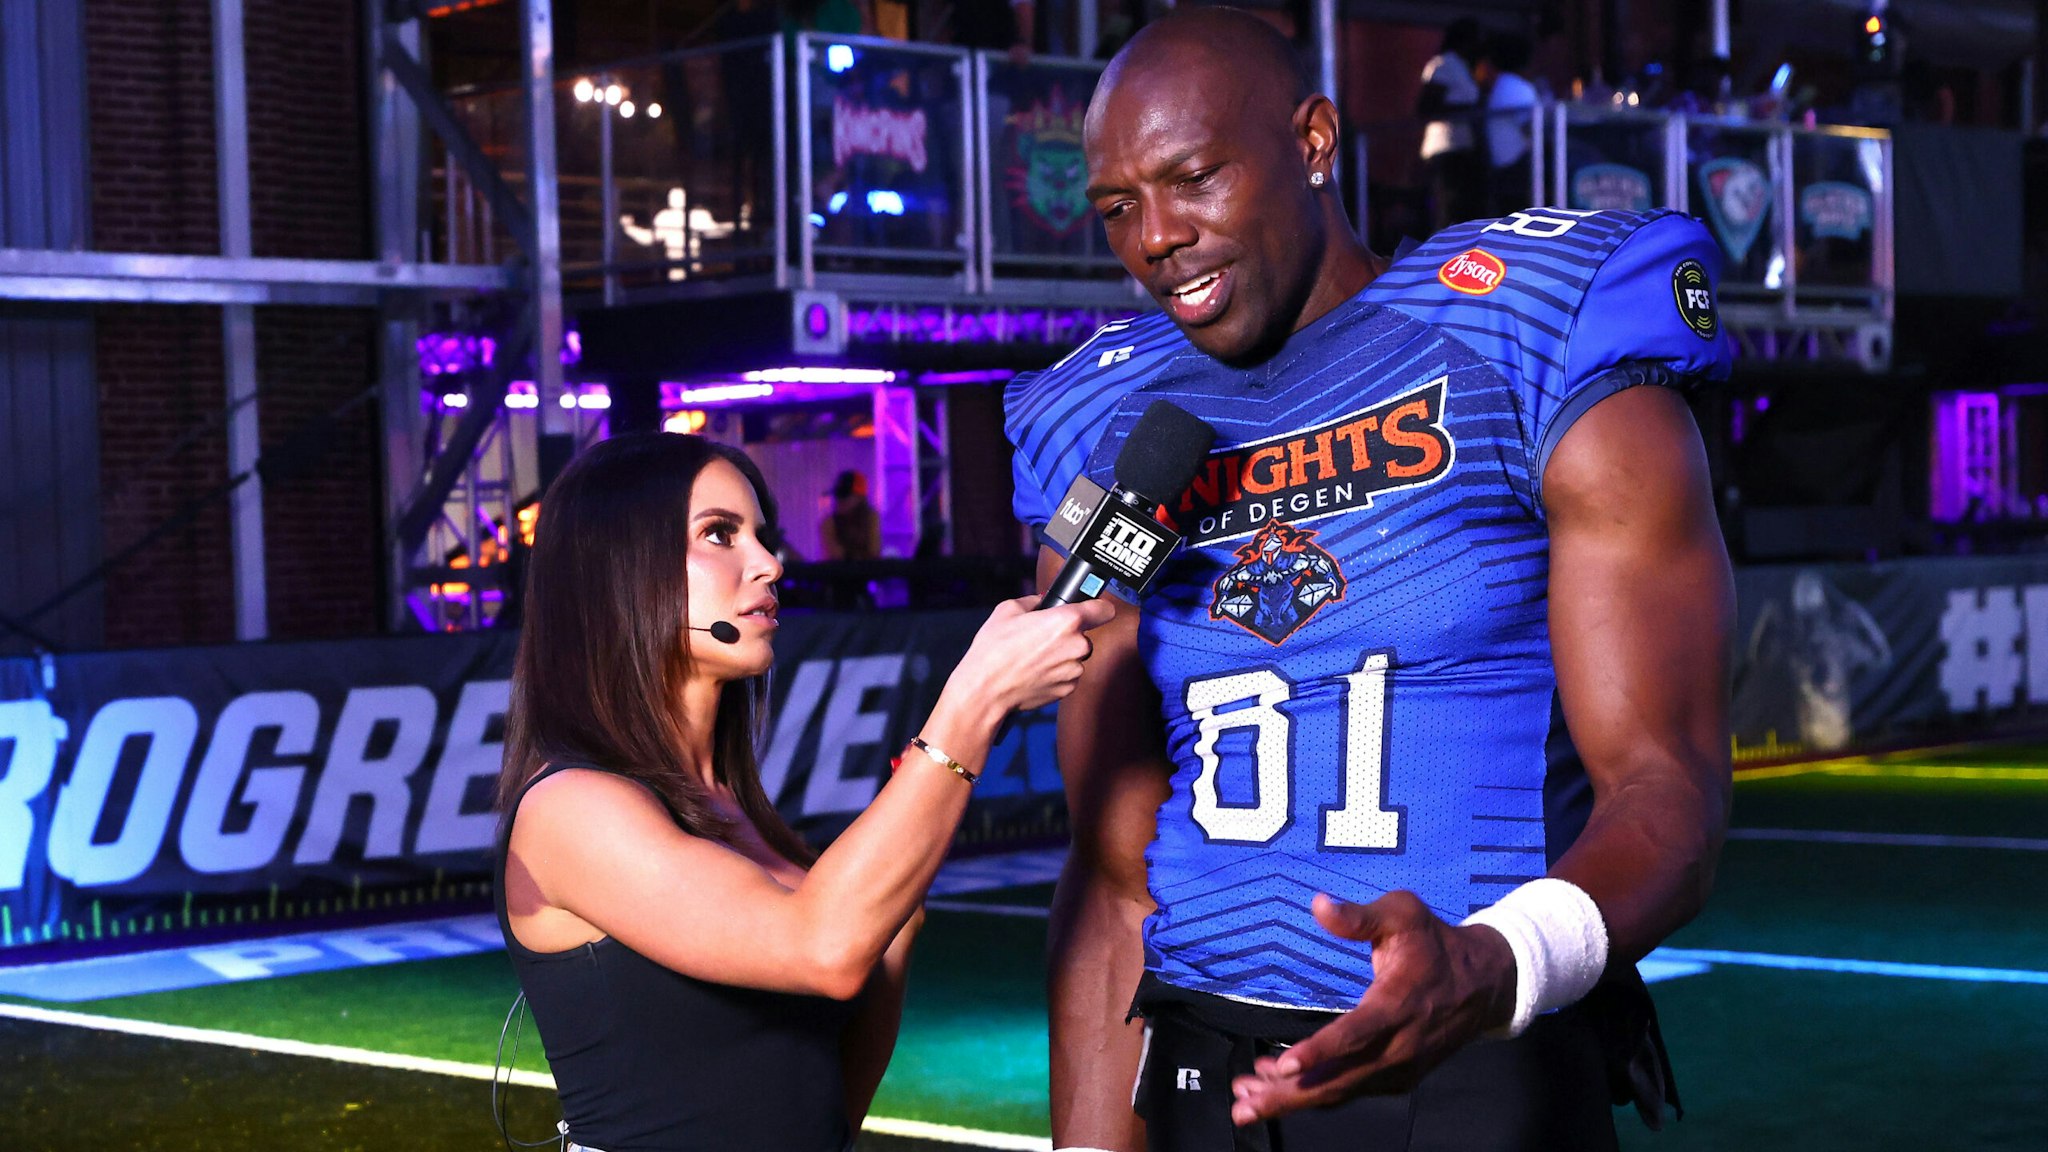 ATLANTA, GEORGIA - MAY 28: Terrell Owens #81 of the Knights of Degen is interviewed after playing the 8OKI during Fan Controlled Football Season v2.0 - Week Seven on May 28, 2022 in Atlanta, Georgia.